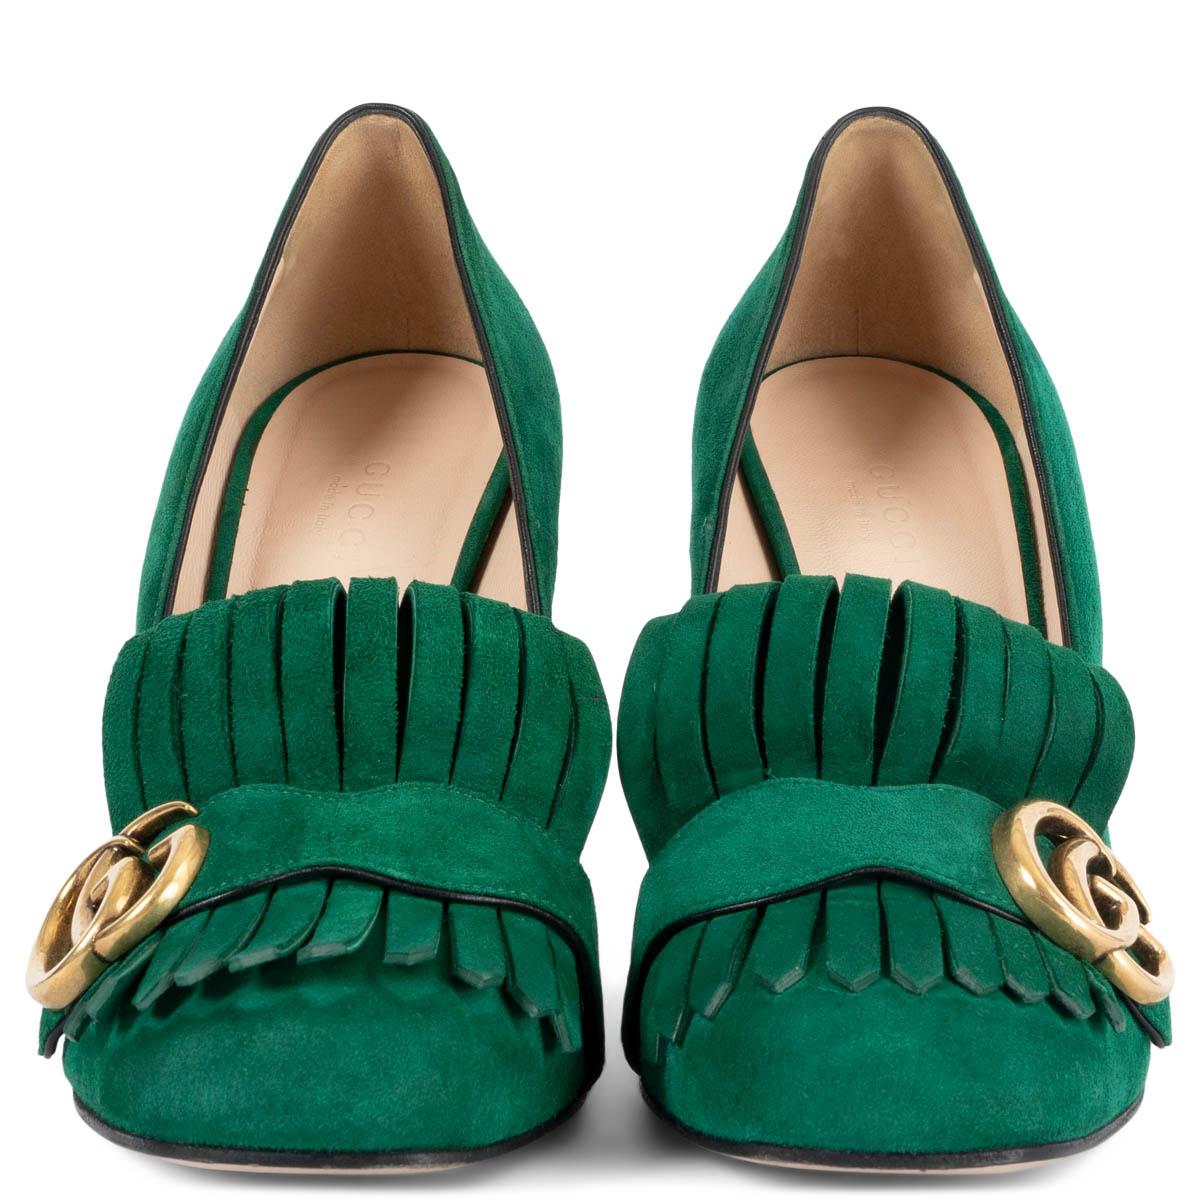 100% authentic Gucci GG Marmont 105 fringe pumps in emerald green suede with antique gold-tone logo. Have been worn once or twice and have a soft smoke odor. 

Measurements
Imprinted Size	38
Shoe Size	38
Inside Sole	25cm (9.8in)
Width	7.5cm